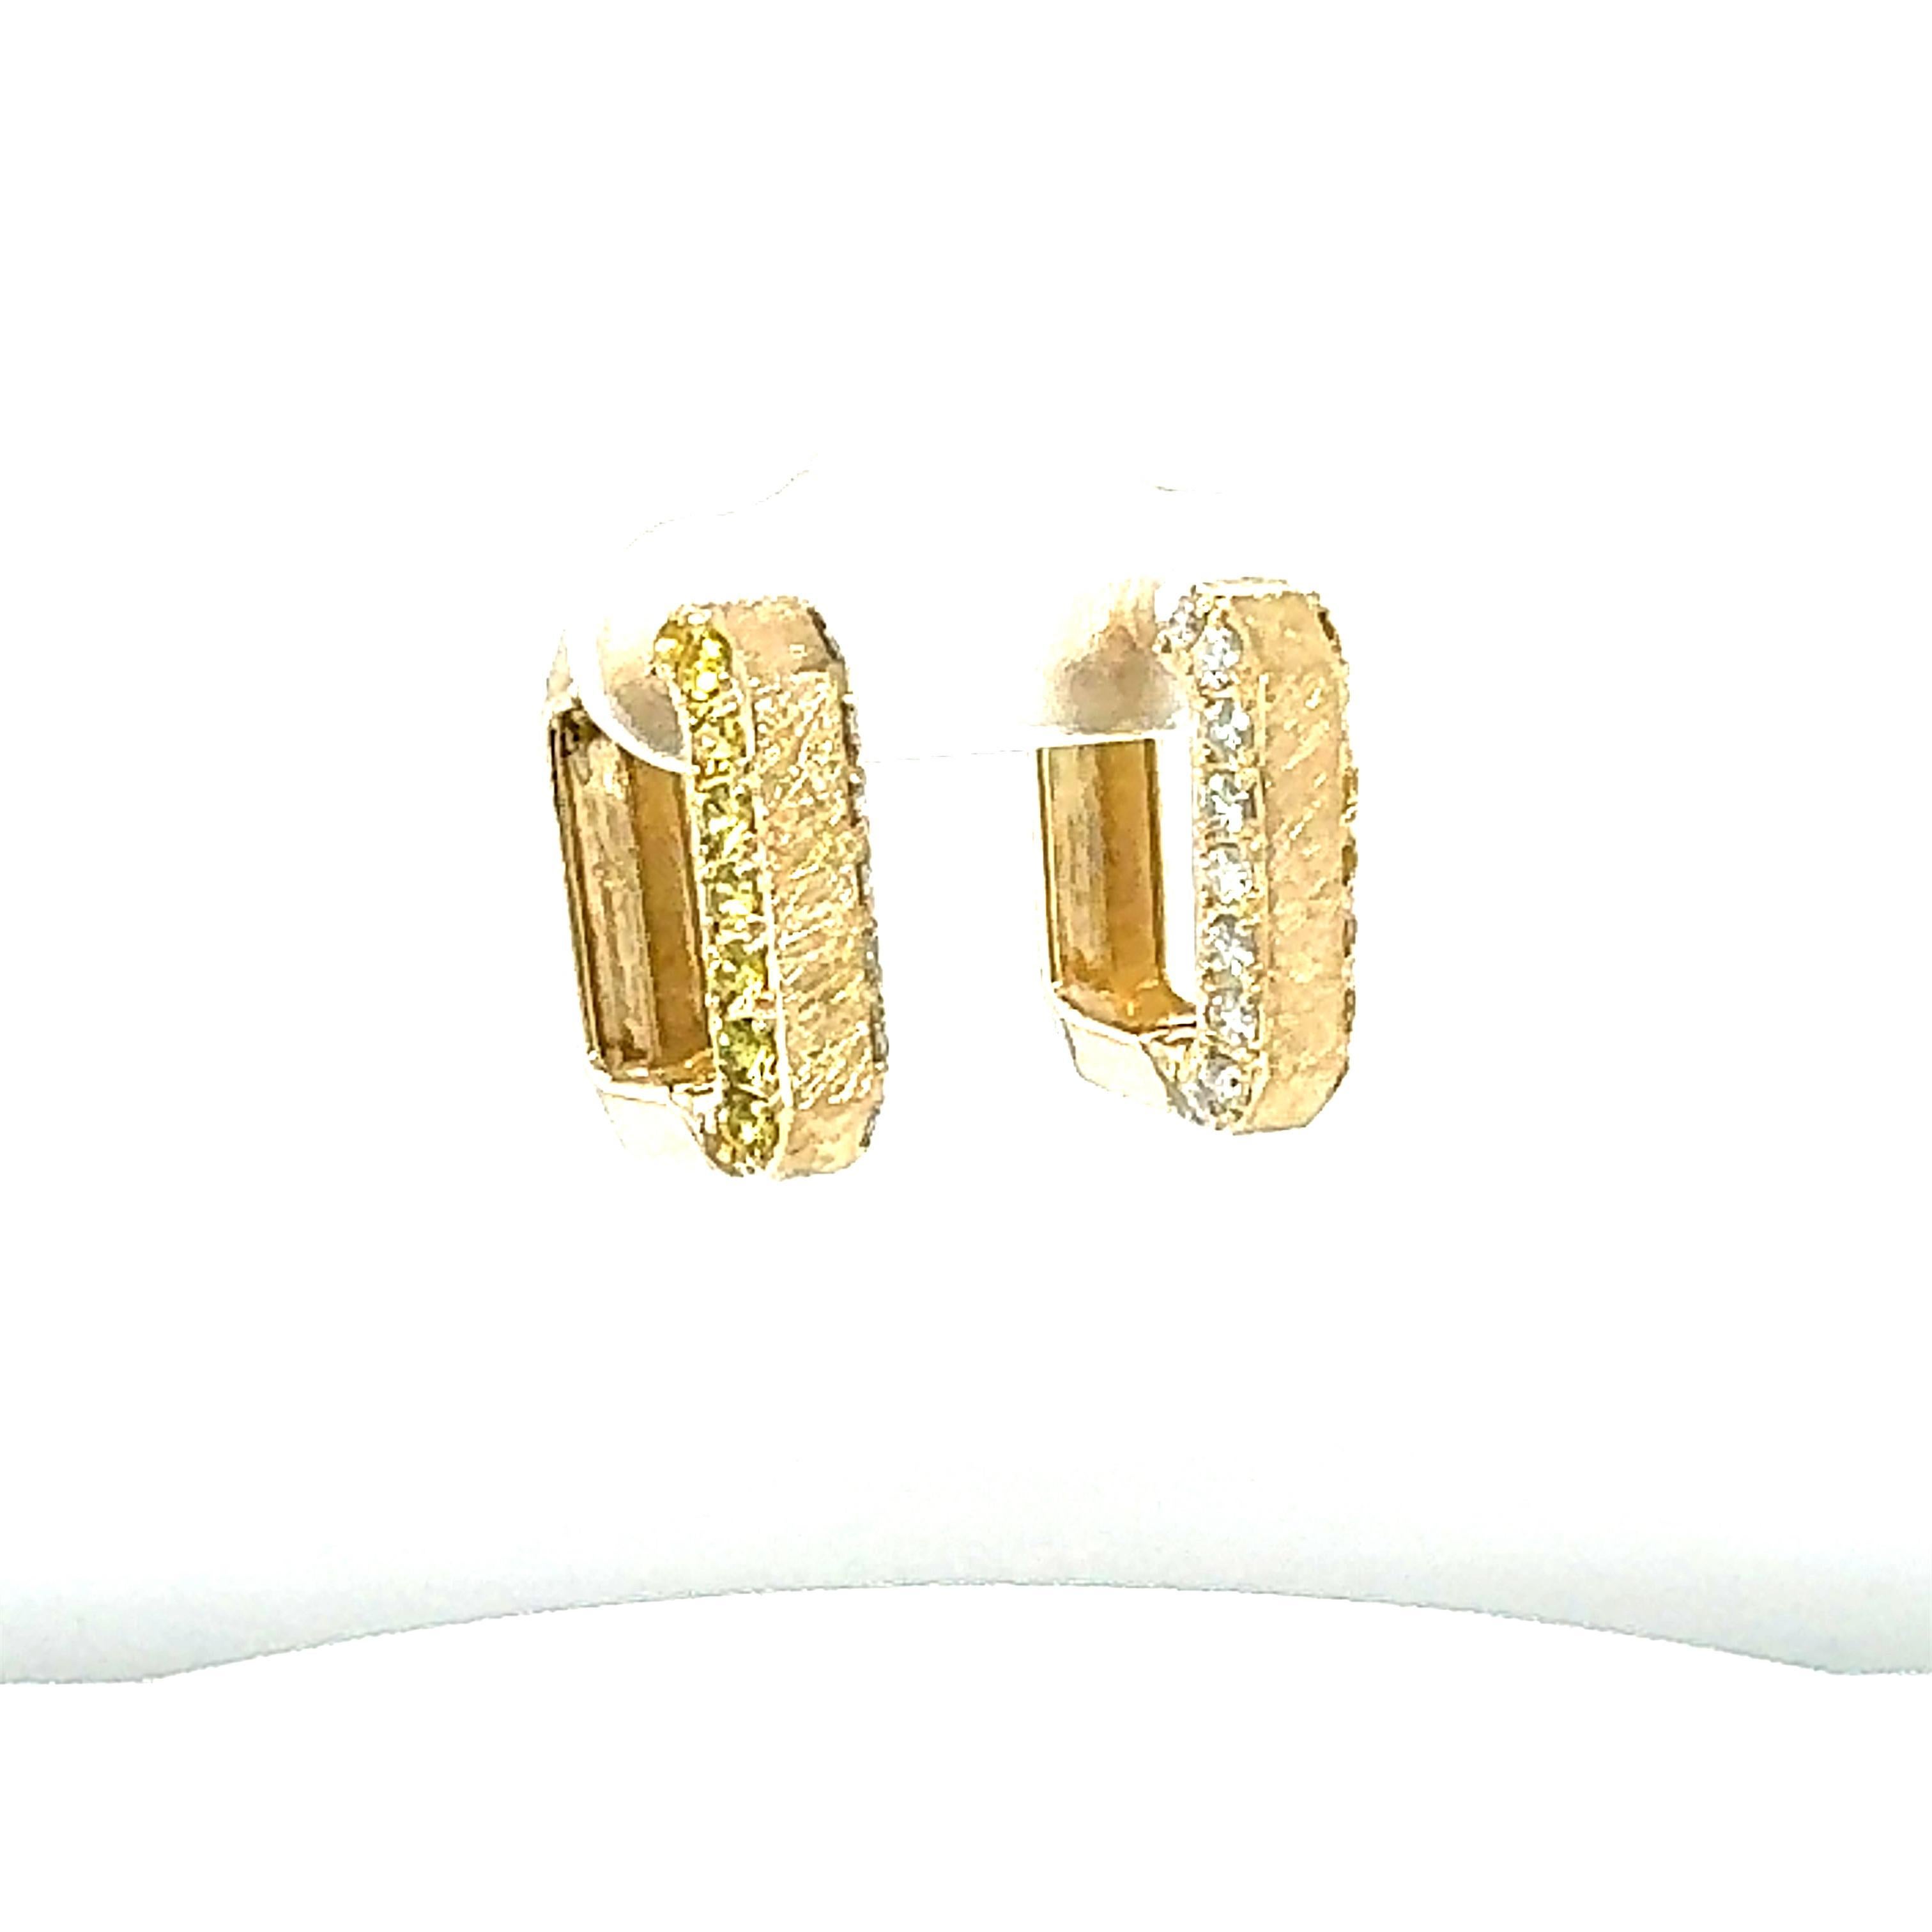 Beautiful and classy Yellow Gold Diamond and Yellow Sapphire Hoop Earrings

Item Specifics:

18 Natural Round Cut White Diamonds weighing approximately 0.46 carats
Clarity: SI1, Color: F
18 Natural Round Cut Yellow Sapphires weighing approximately